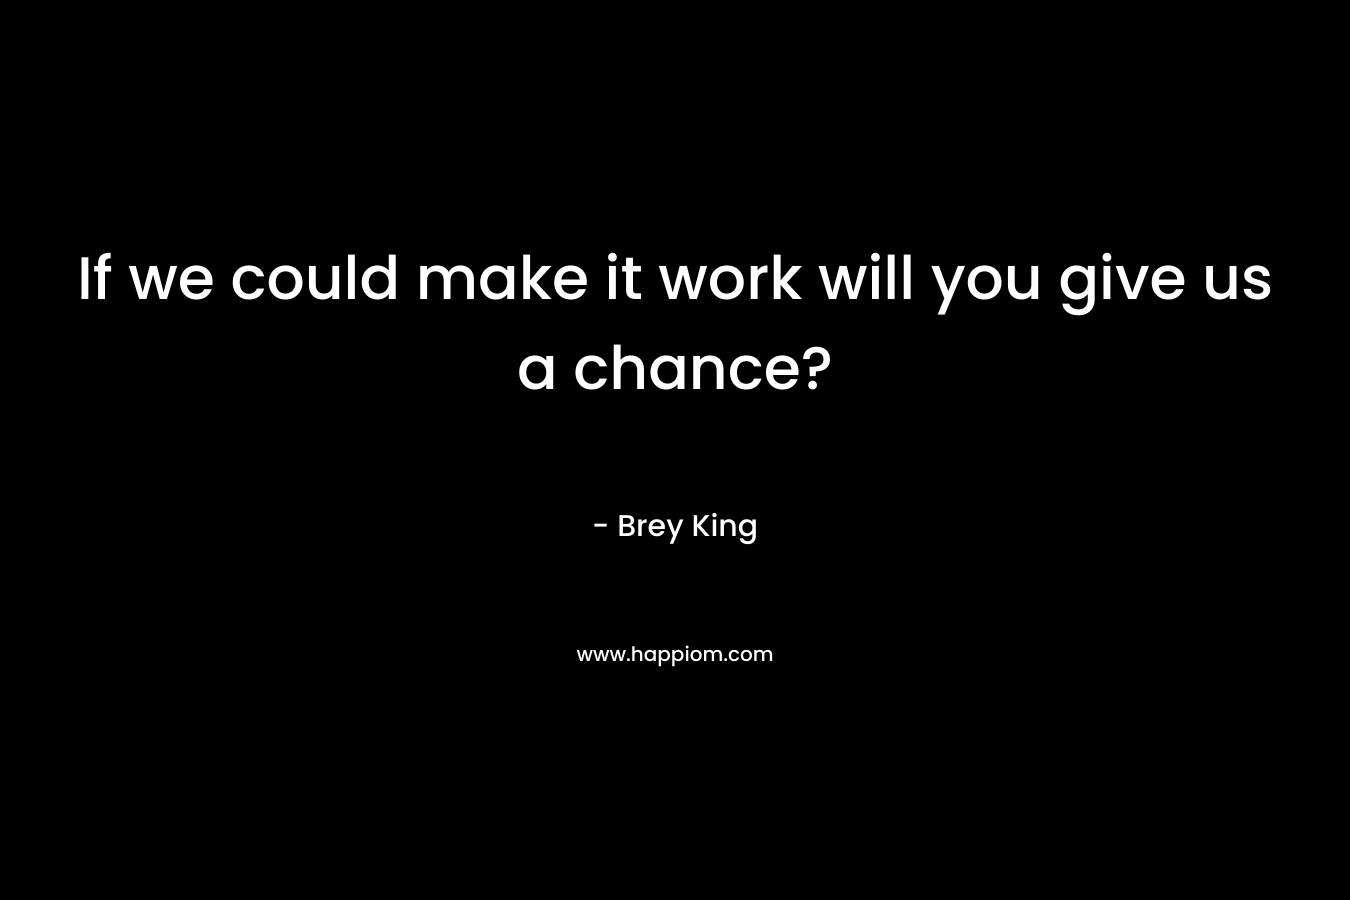 If we could make it work will you give us a chance? – Brey King